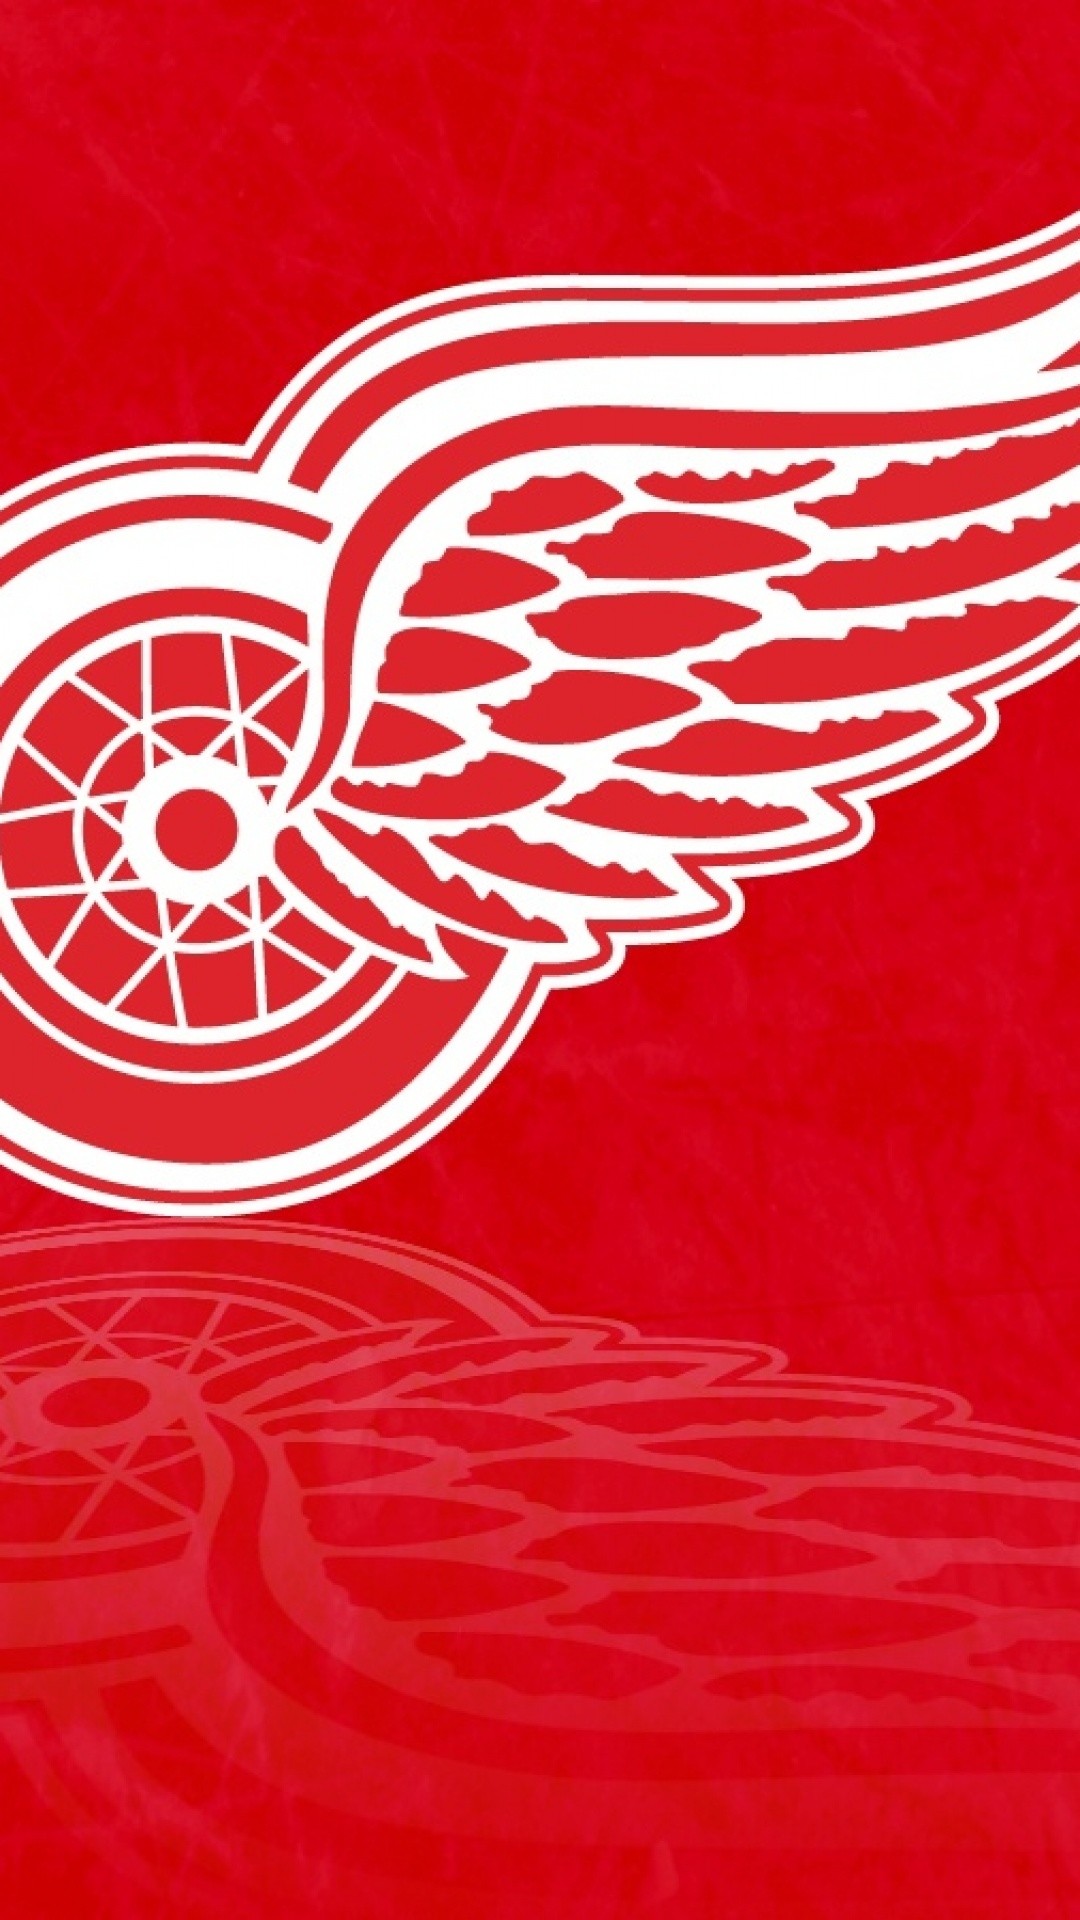 1080x1920 Red Wings Iphone 5 Wallpaper | Id: 25600